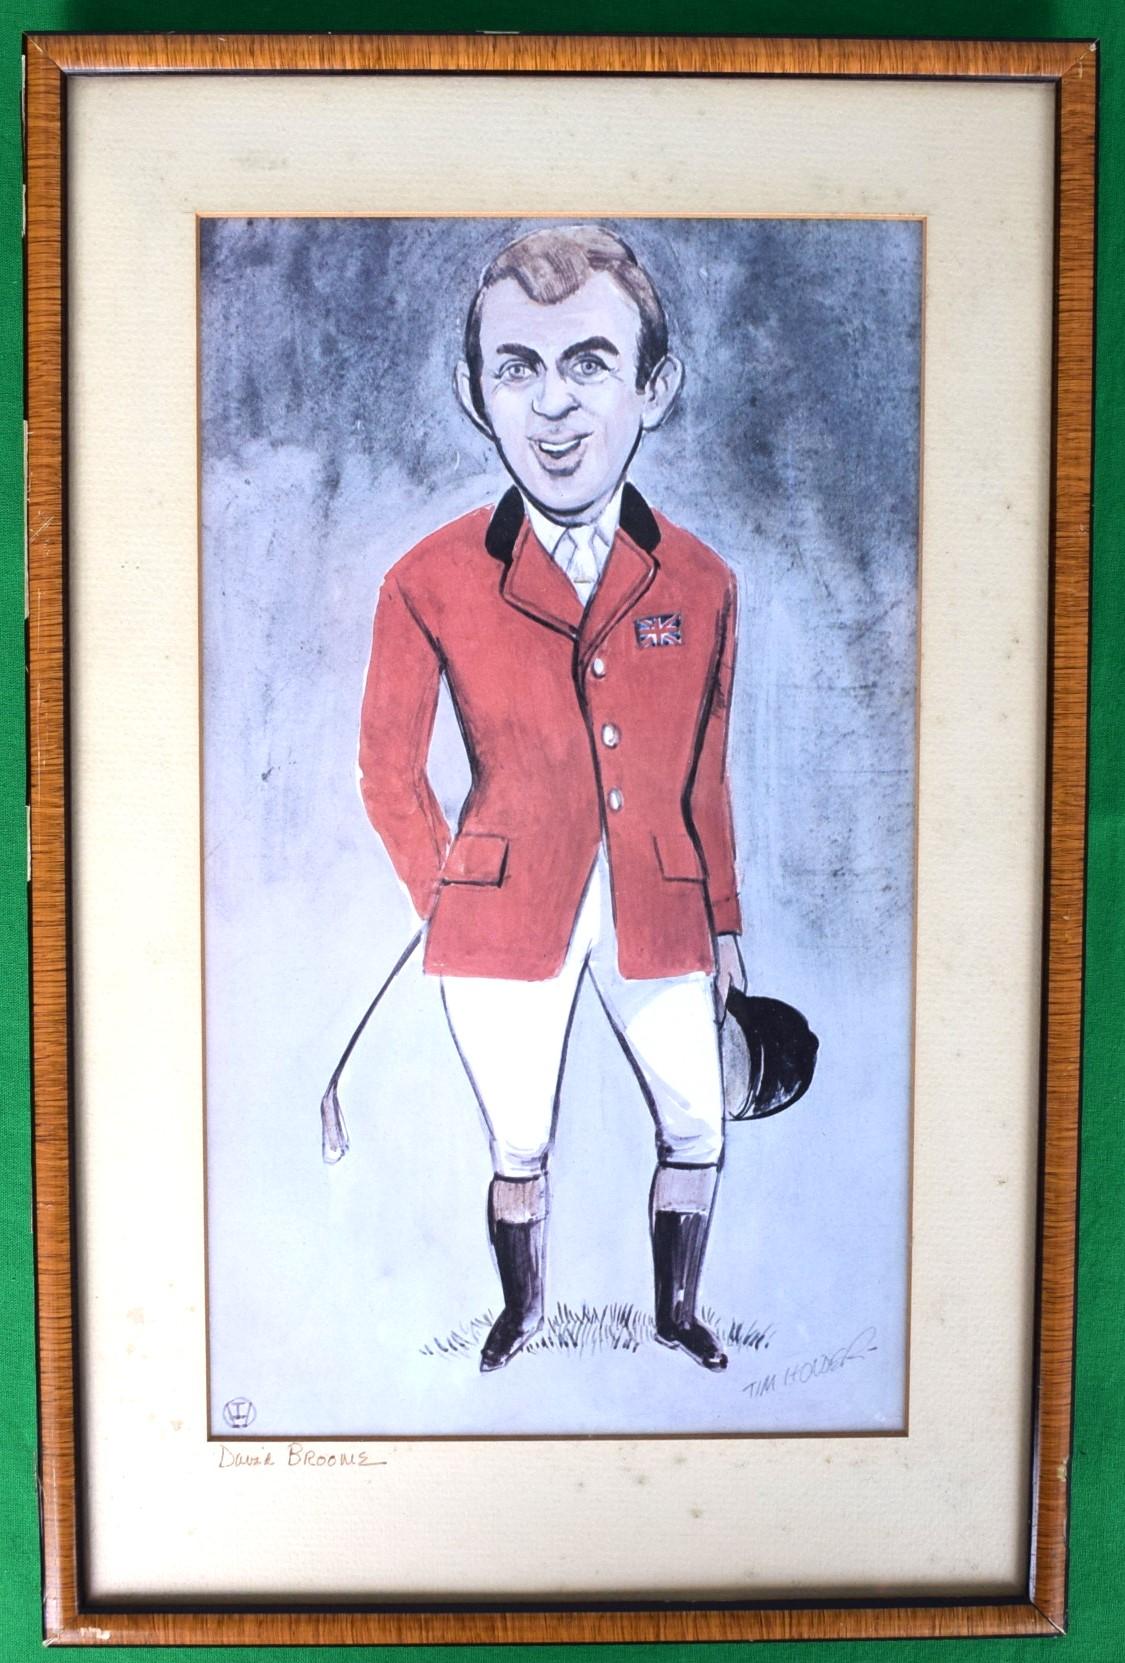 David Broome Welsh Show Jumping Champion - Print by Tim Holder 